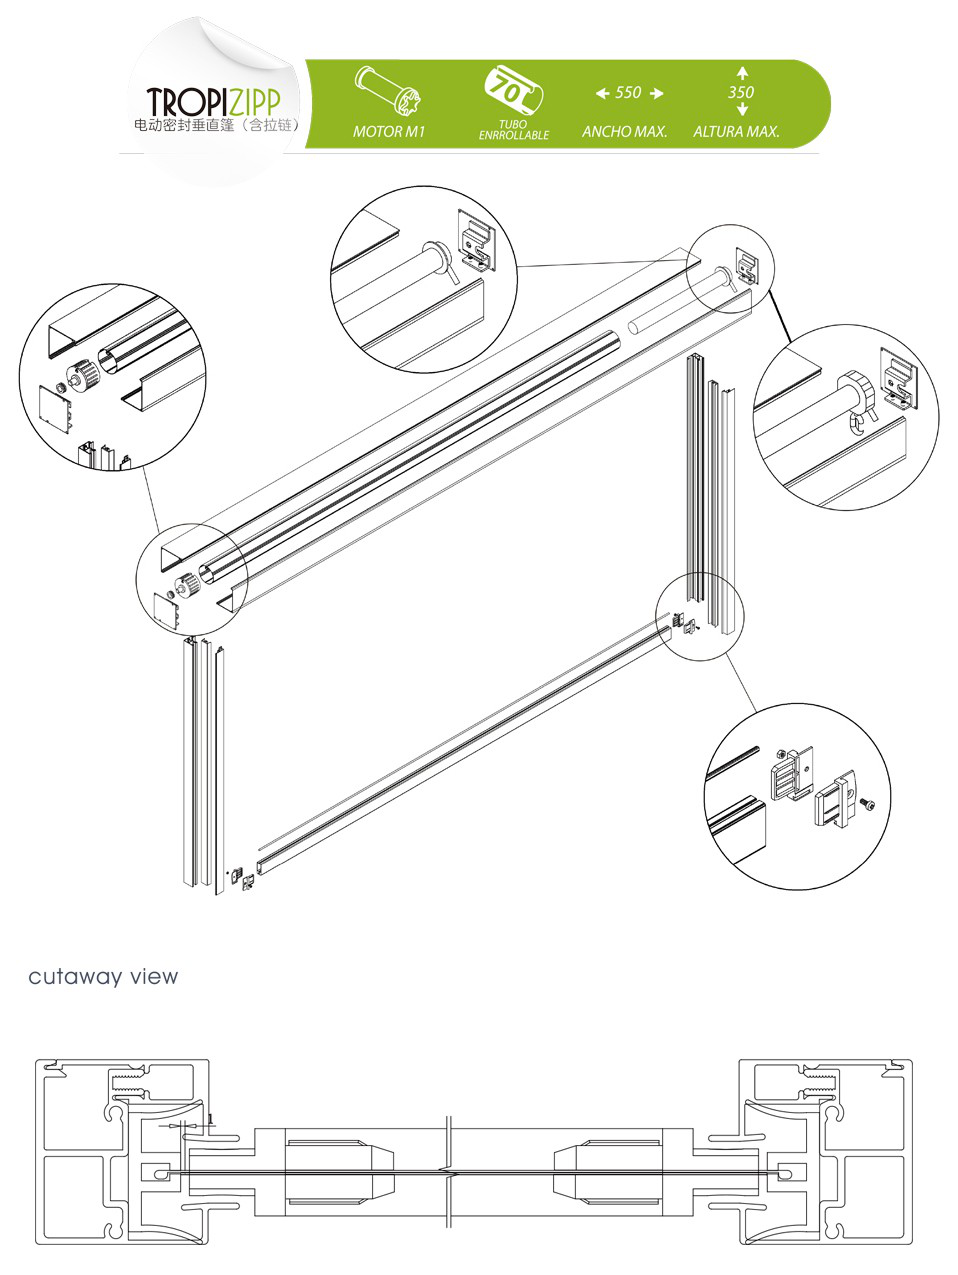 How it works Motorized Outdoor Roller Blind with zipper track?